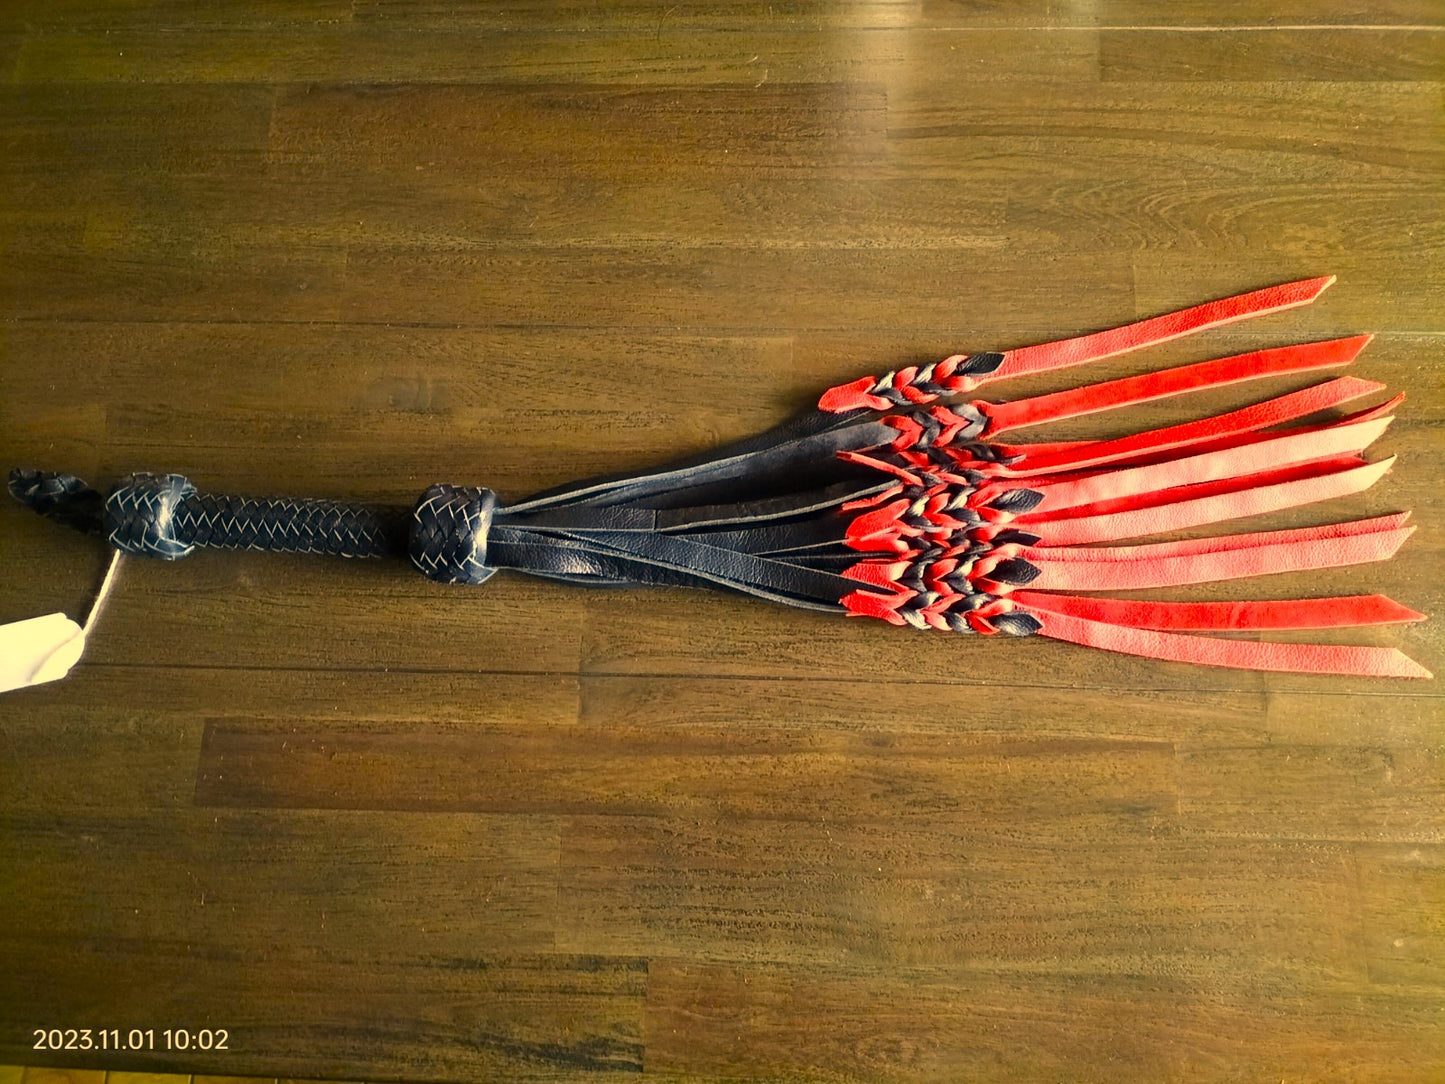 12 falls flogger with red-black woven falls of 4 mm thick